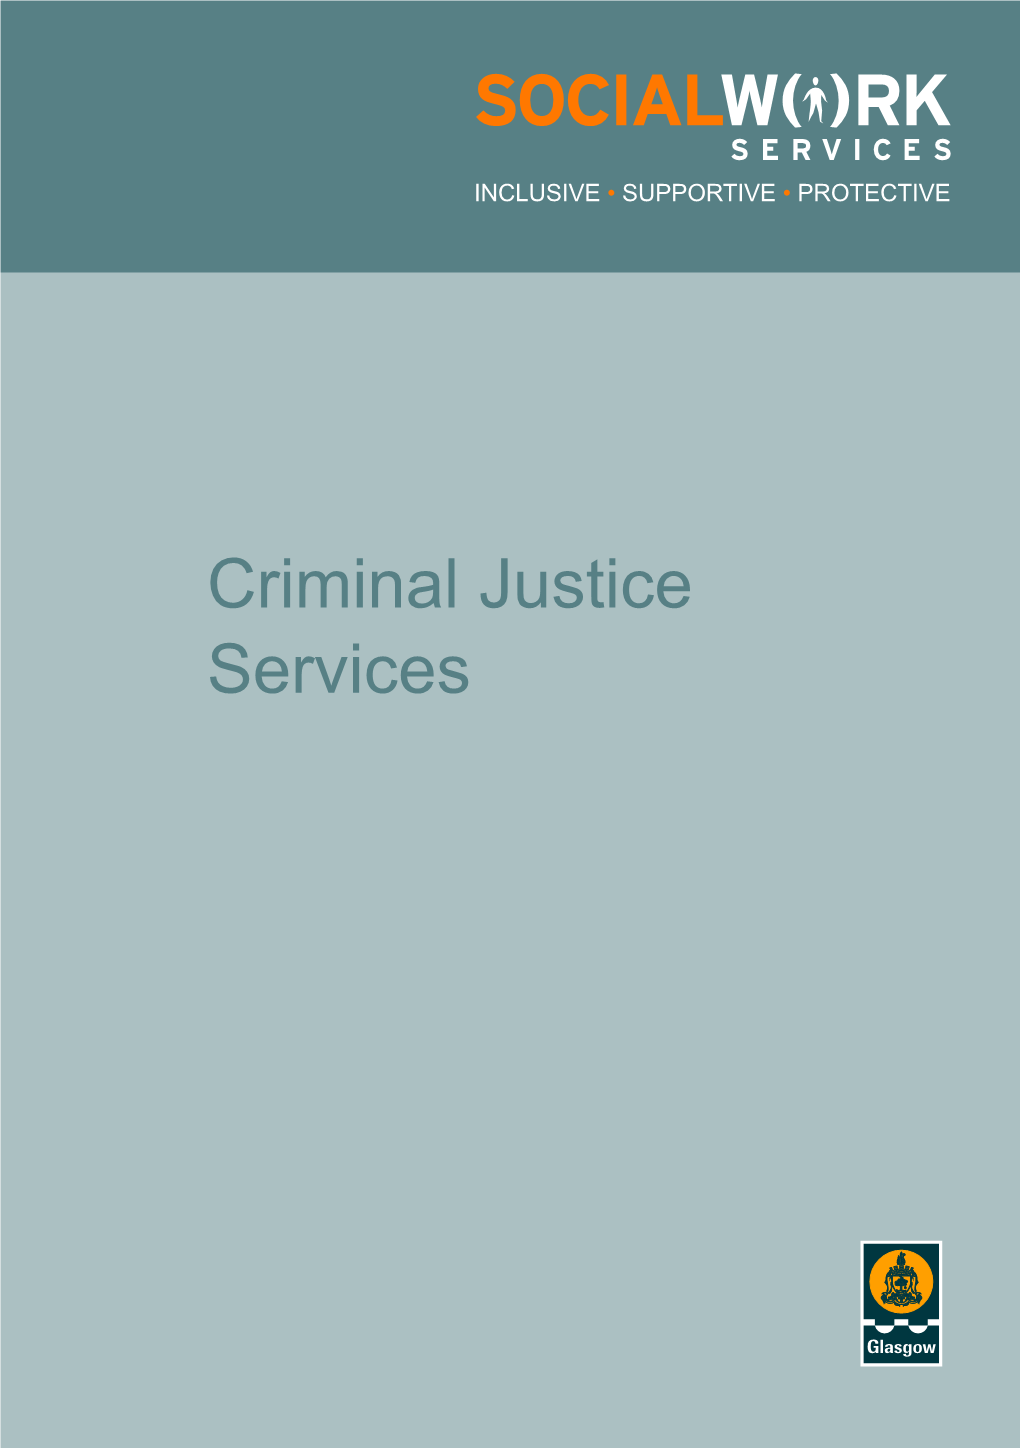 Glasgow City Council’S Social Work Services to the Criminal Justice System